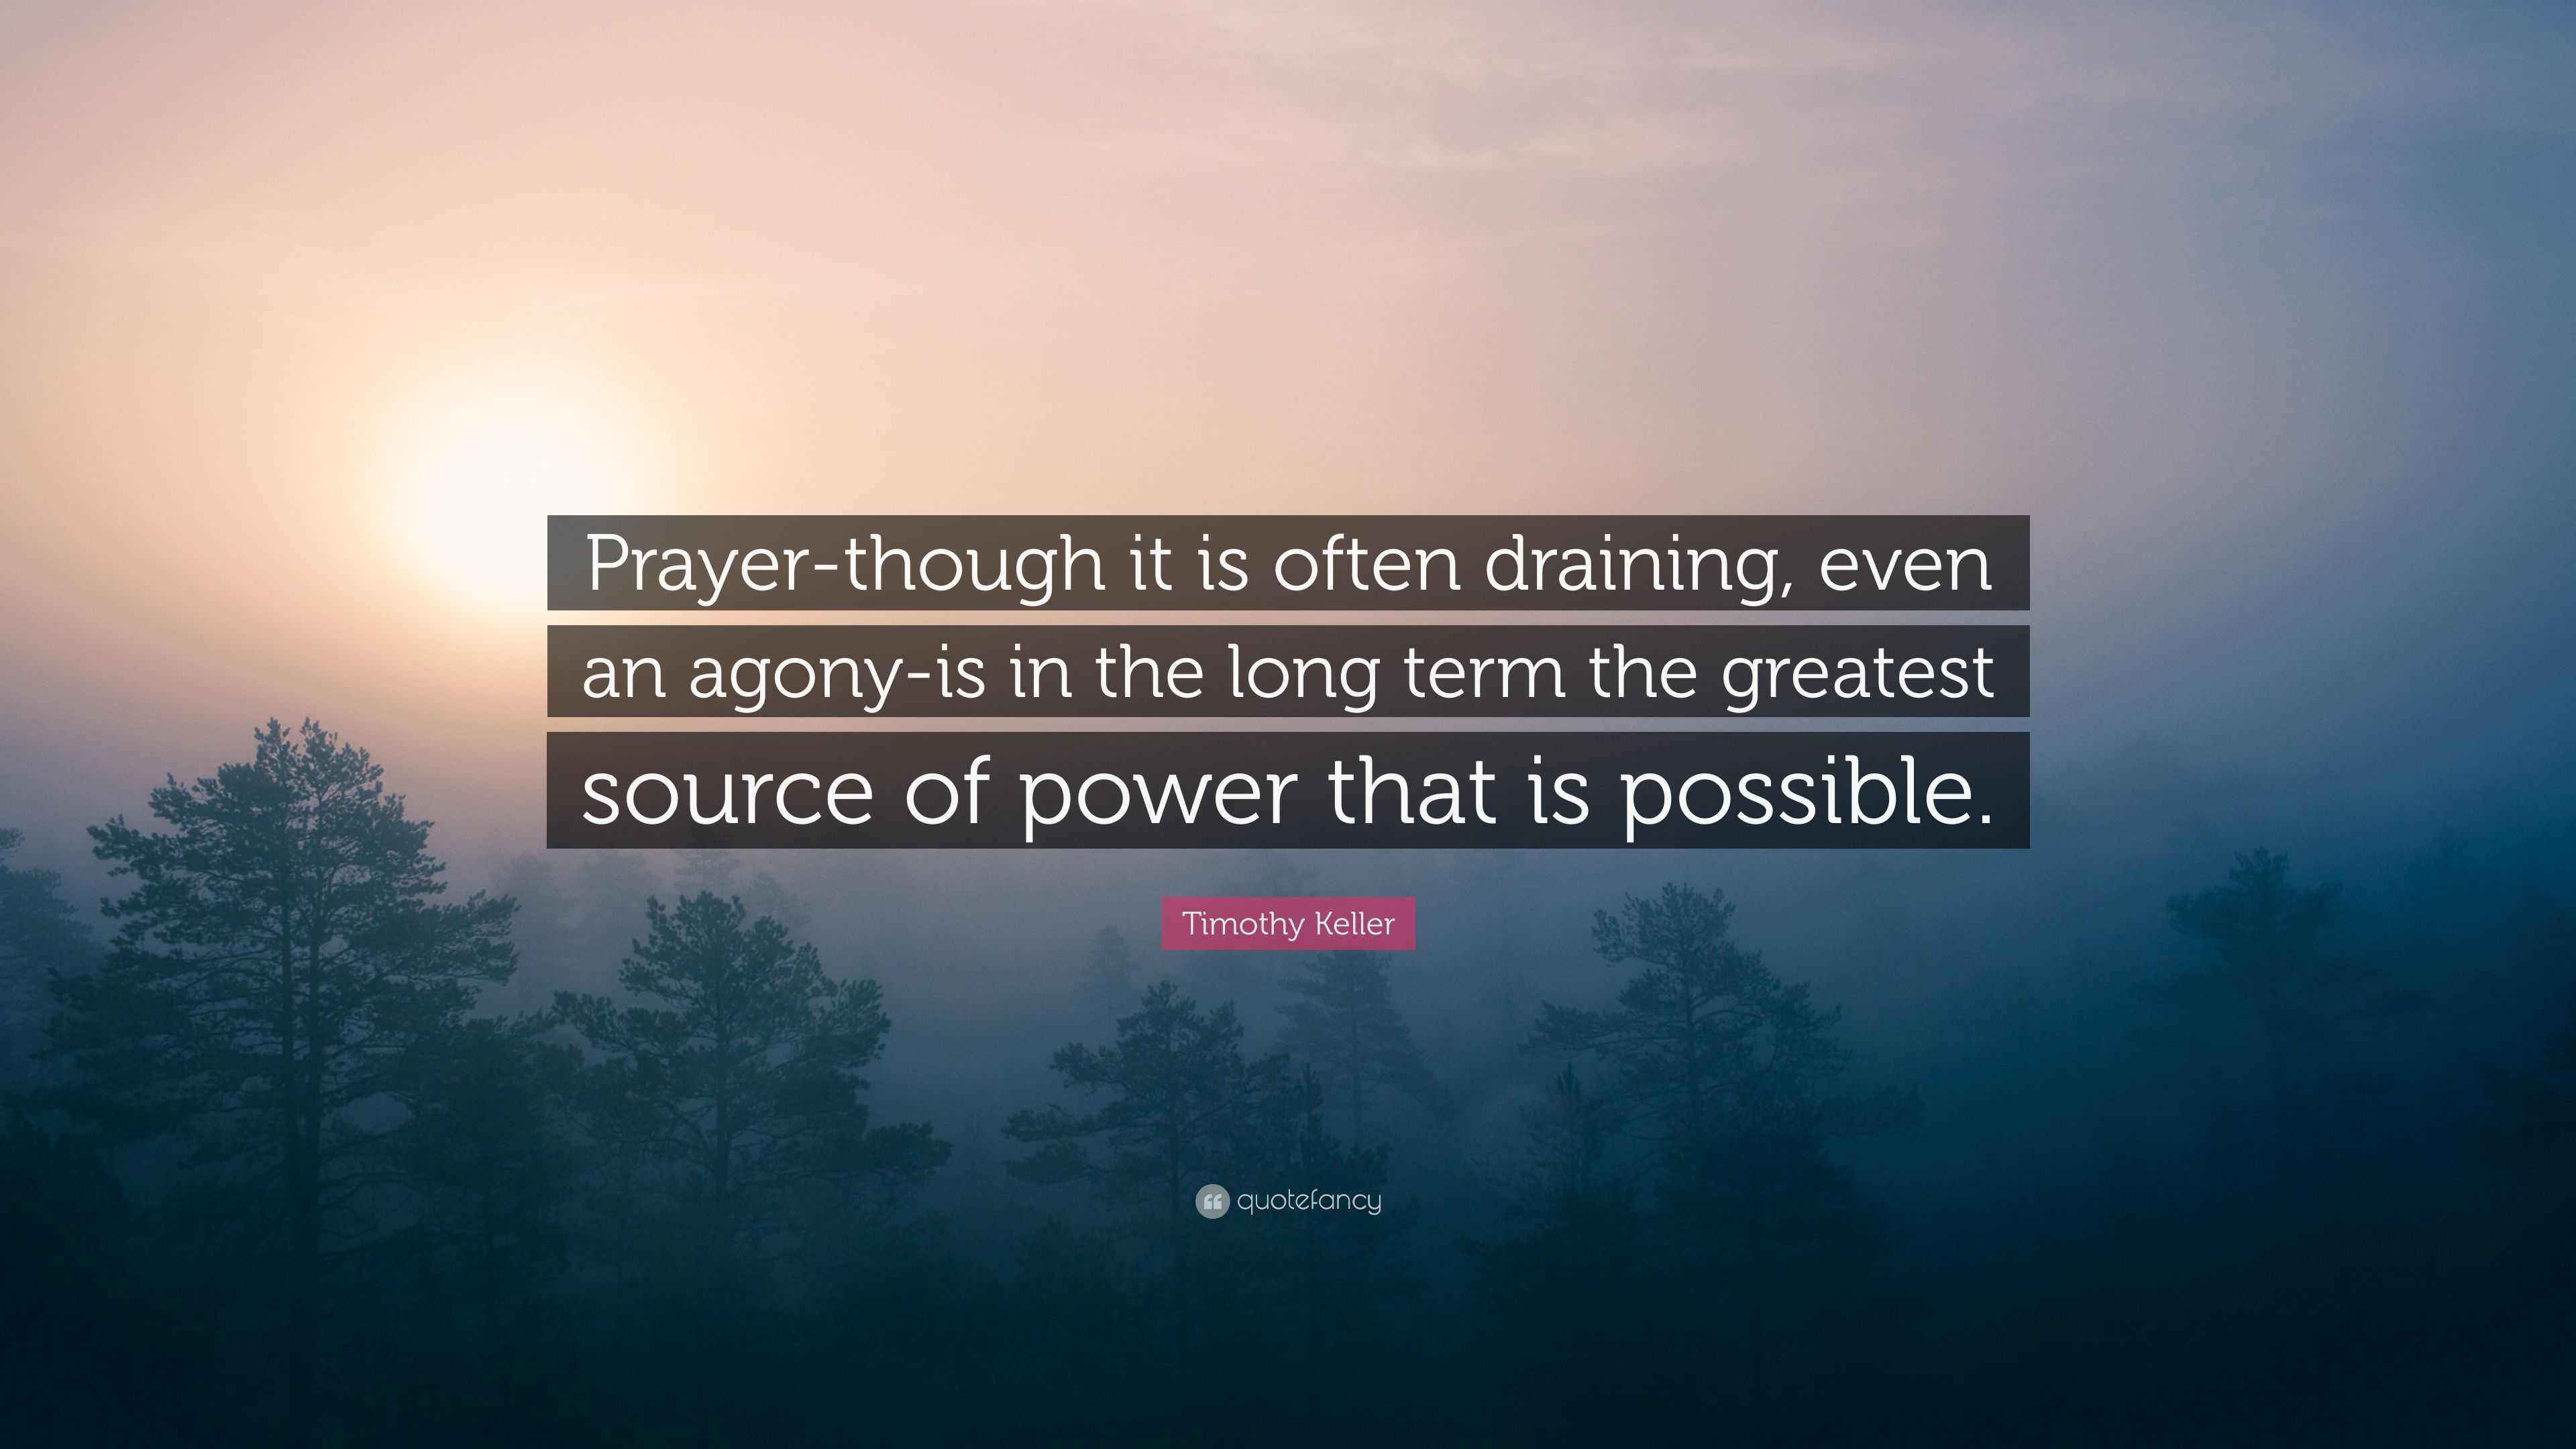 Timothy Keller Quote: “Prayer-though it is often draining, even an ...